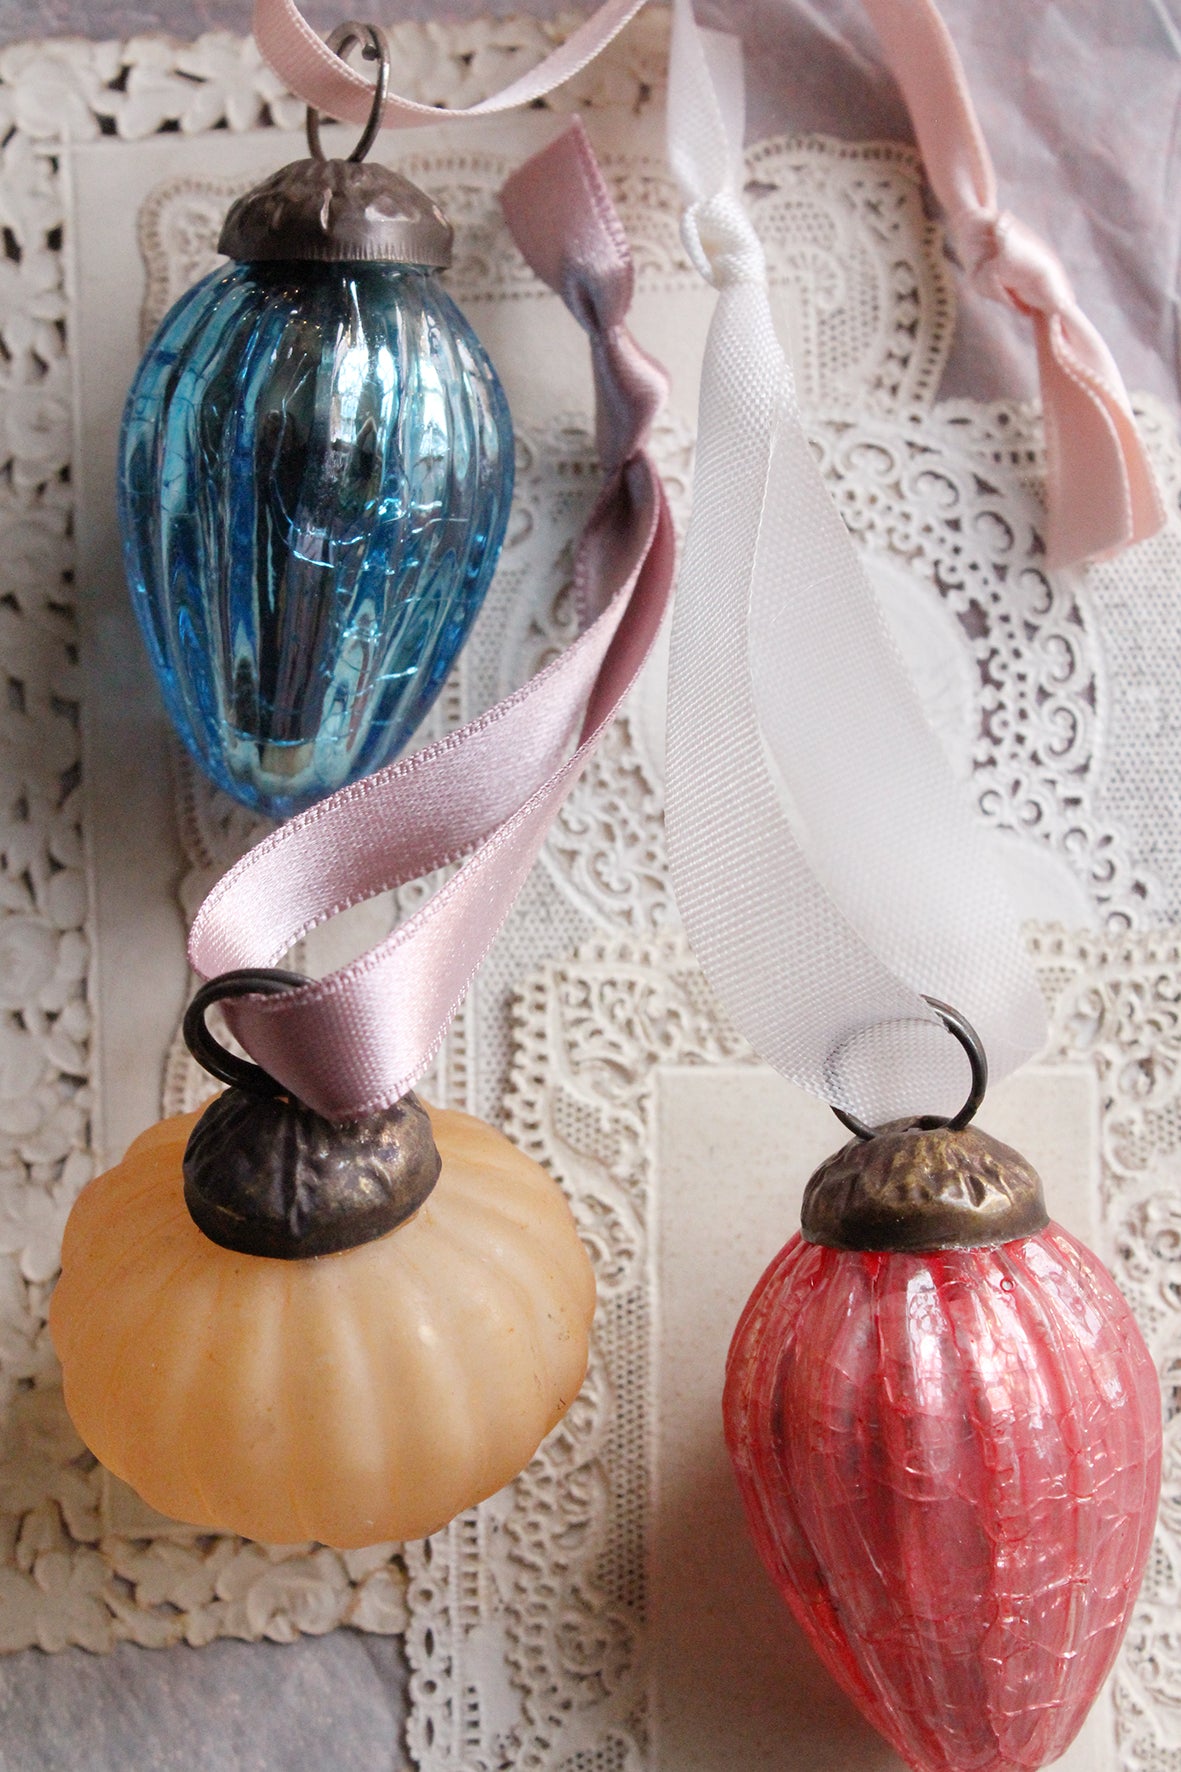 Beautiful Glass Decorations - Patisserie Blue Foil, Pomegranate & Frosted Honey